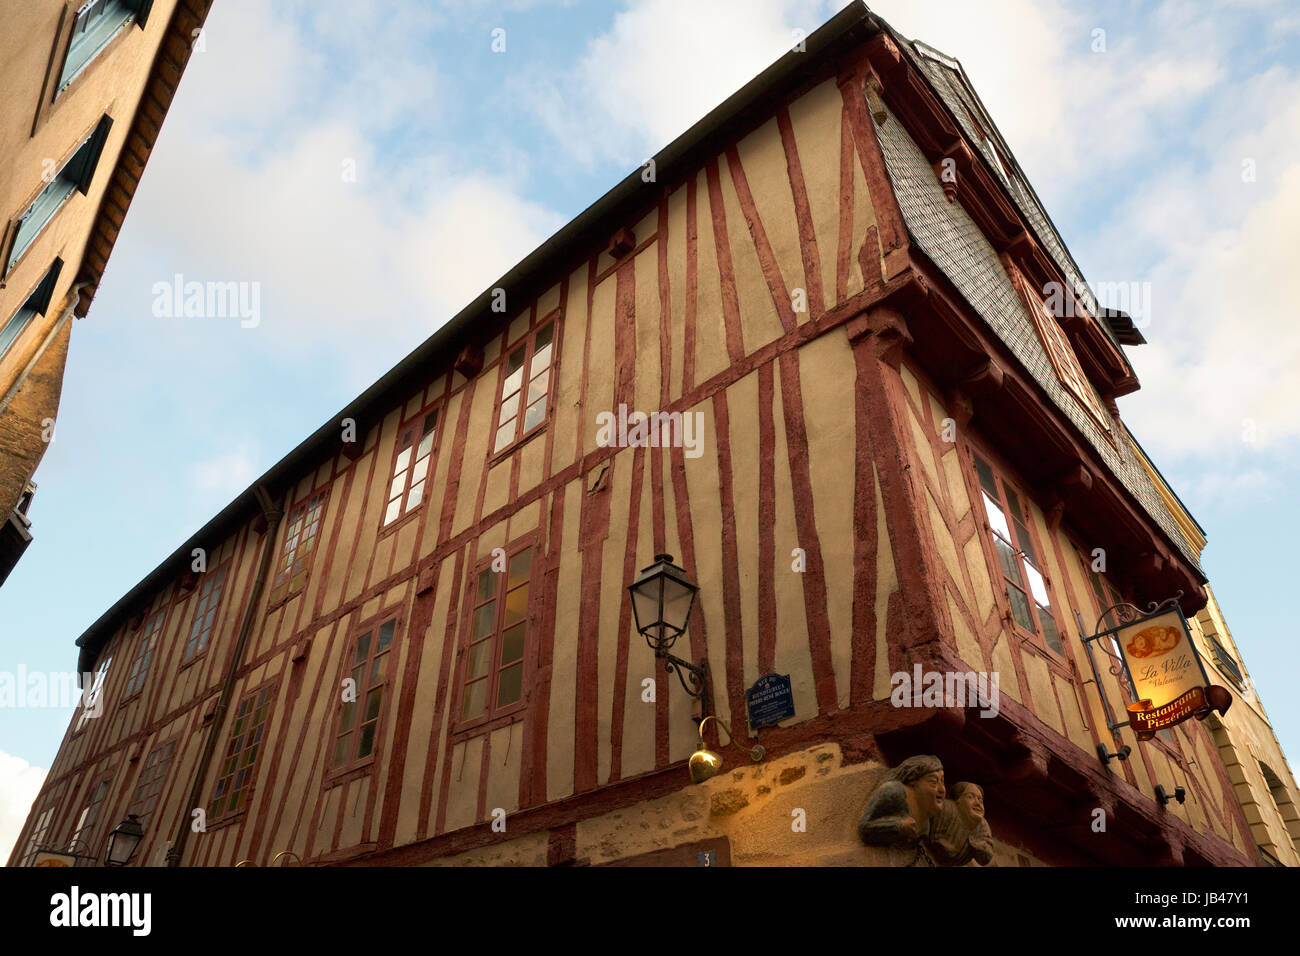 Medieval architecture, Vannes, Brittany,  France Stock Photo